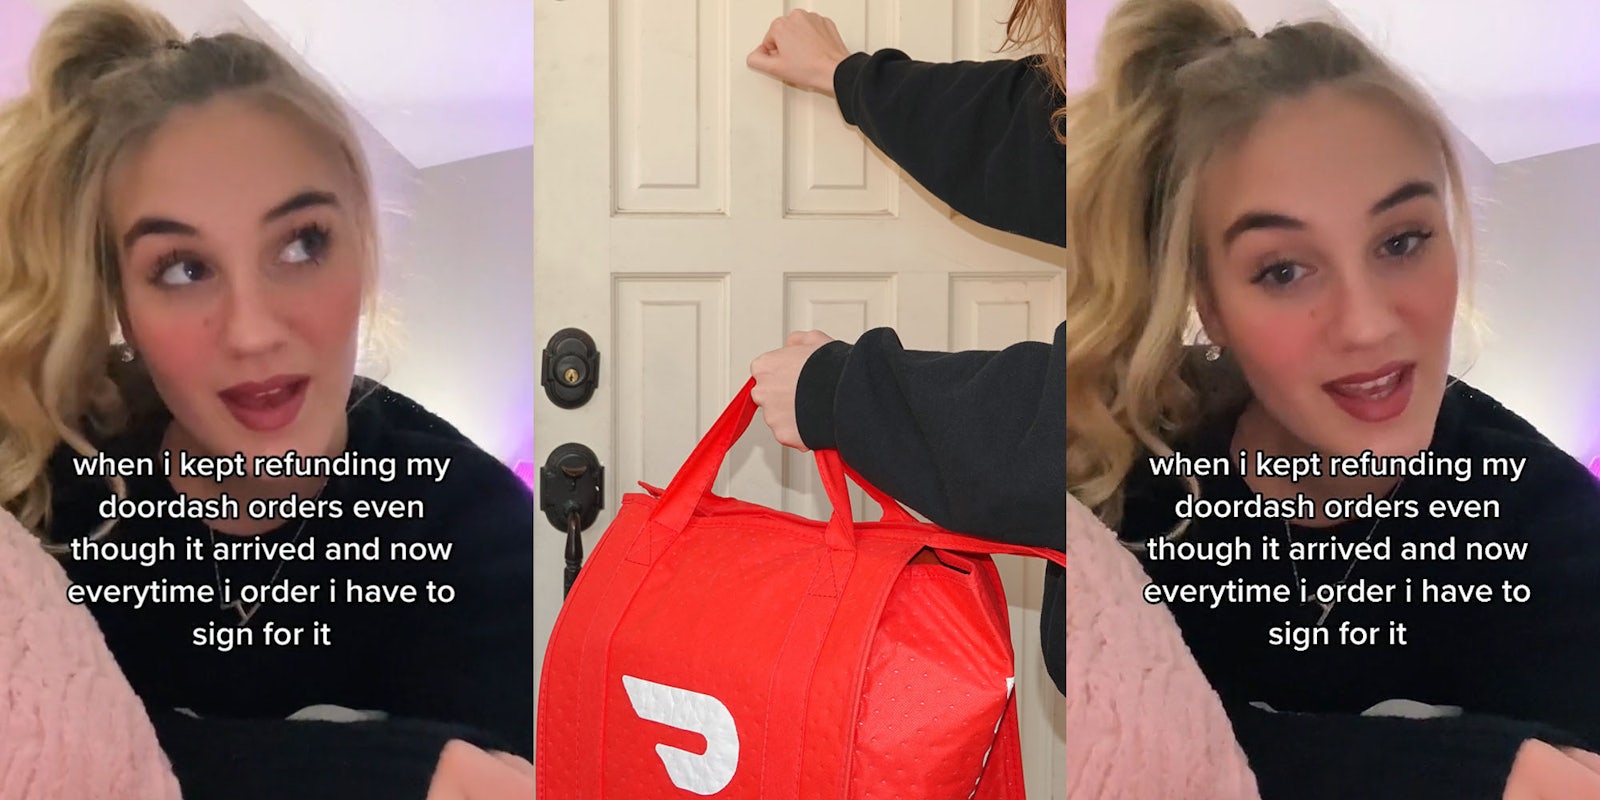 woman speaking caption 'when i kept refunding my doordash orders even though it arrived and now everytime i order i have to sign for it' (l) DoorDash delivery in worker's hand as they knock on white door (c) woman speaking caption 'when i kept refunding my doordash orders even though it arrived and now everytime i order i have to sign for it' (r)